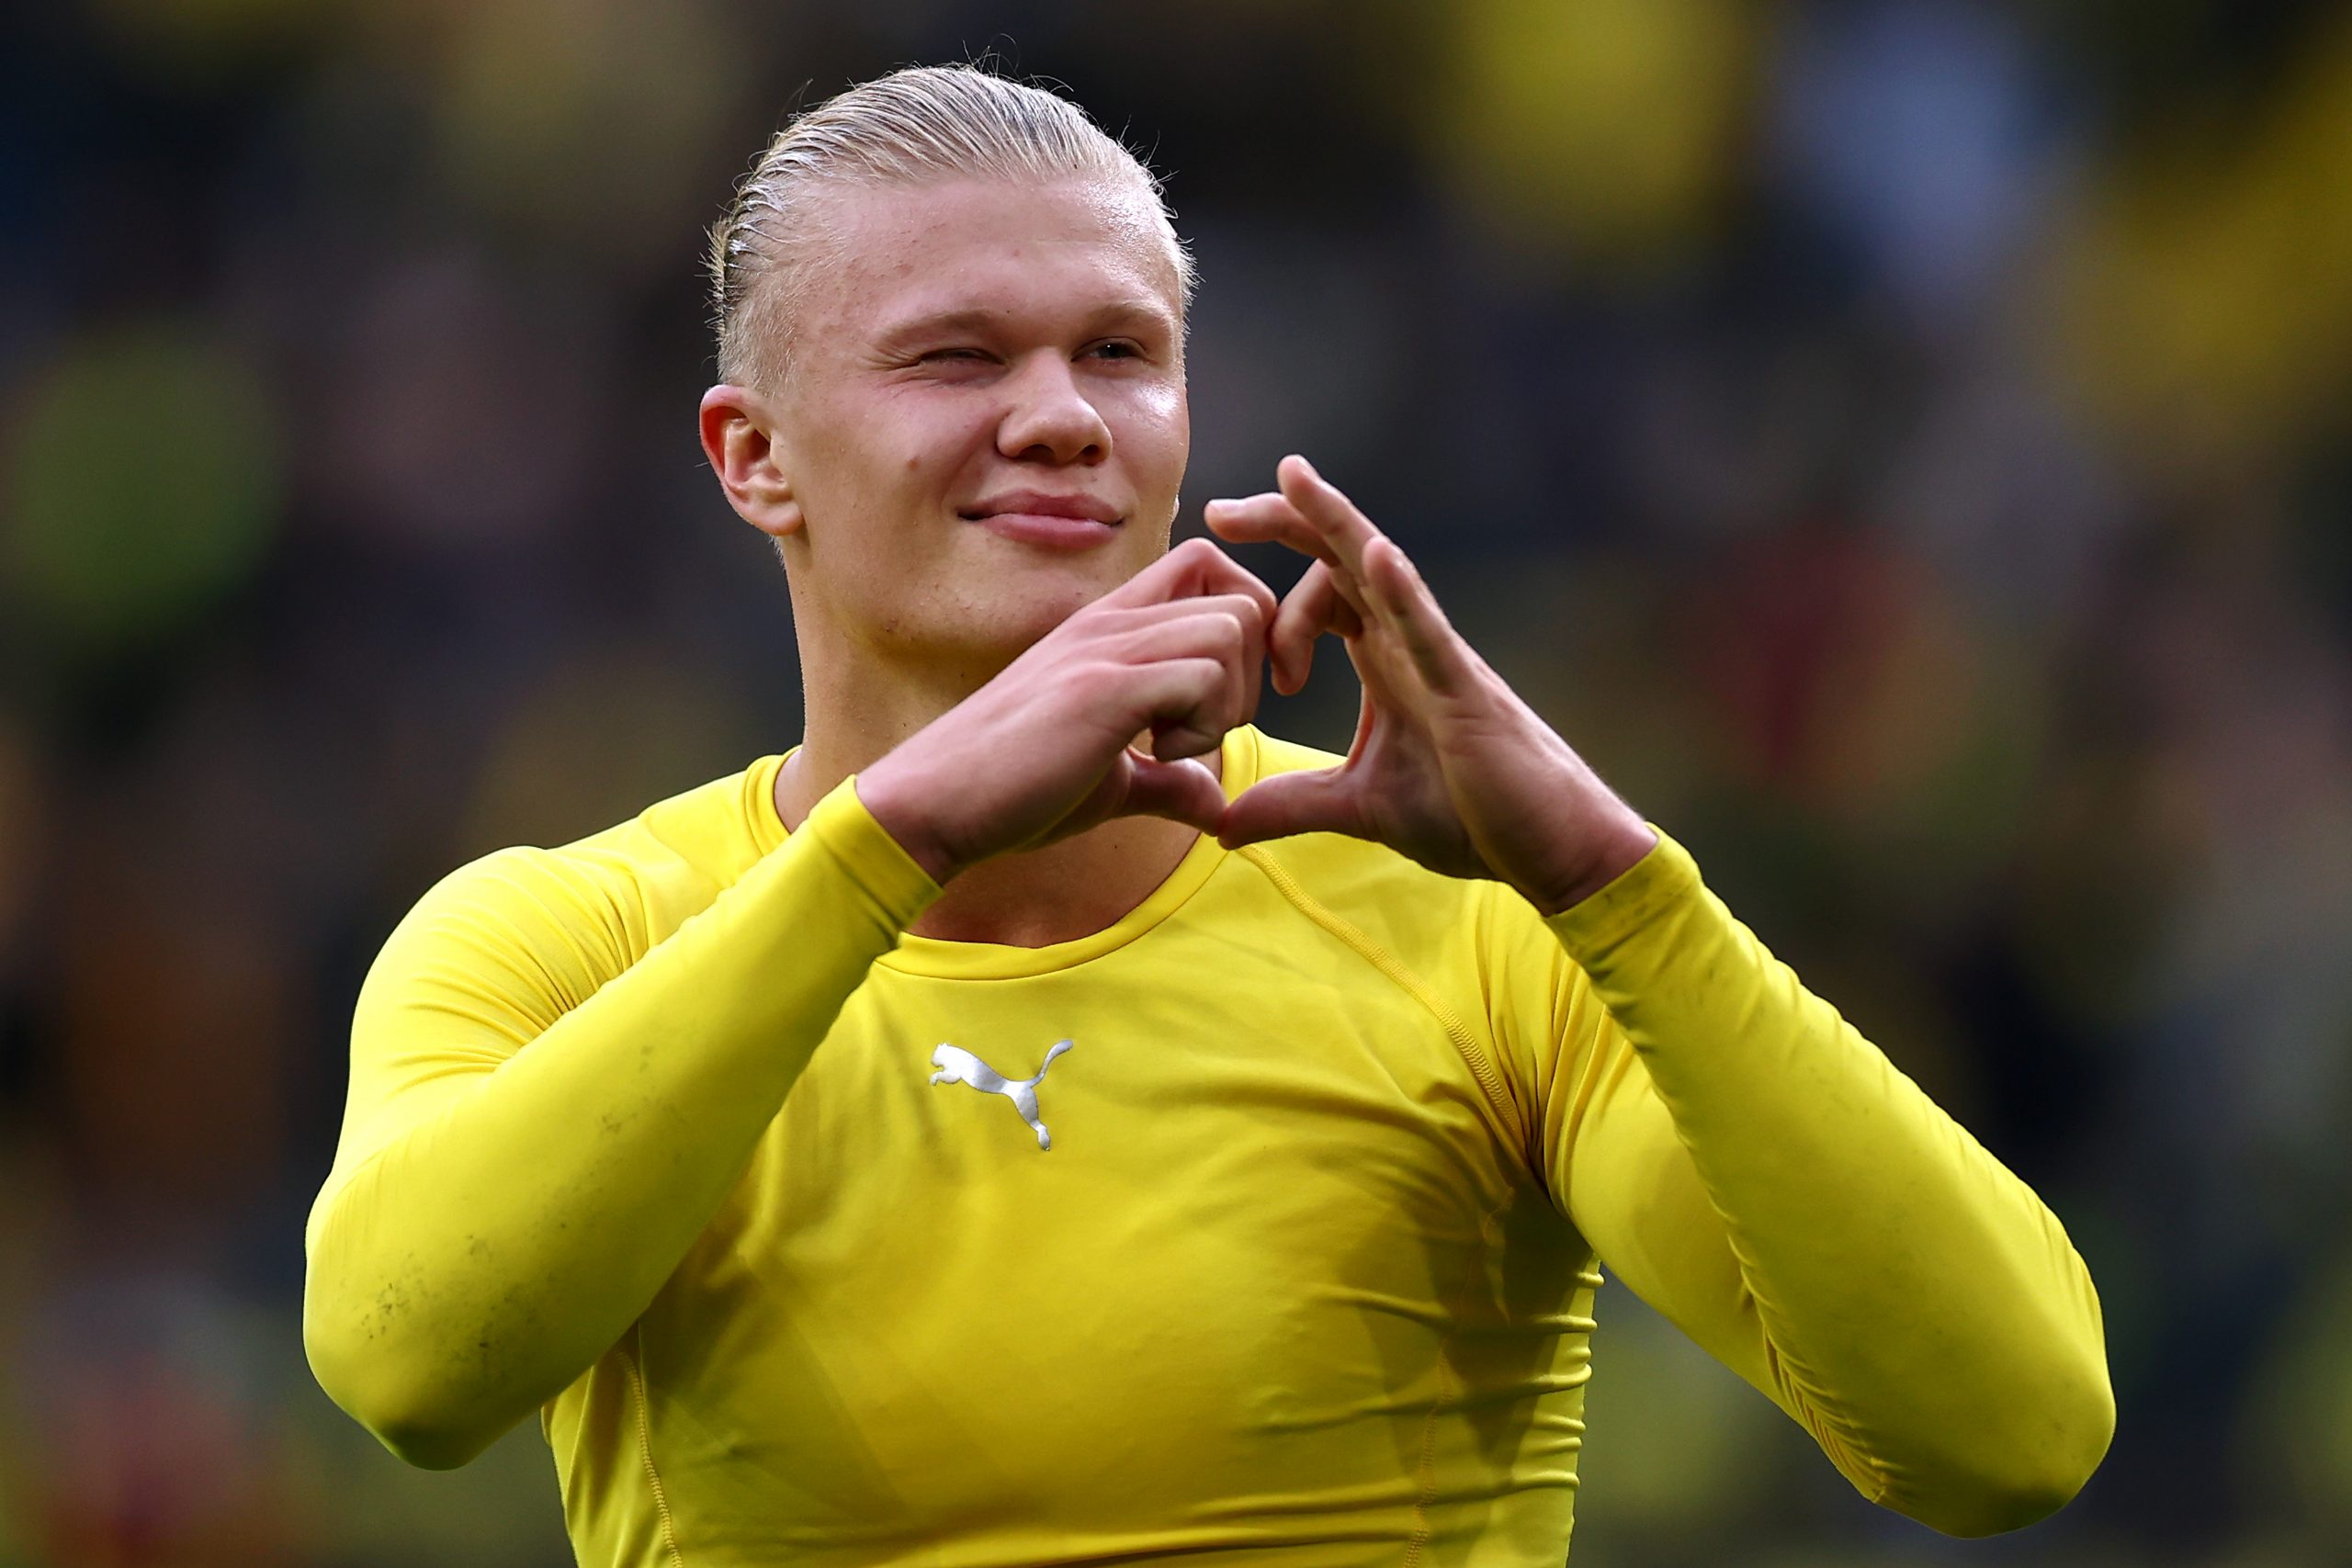 Bayern Munich could be out of the race to sign Erling Haaland in the summer.